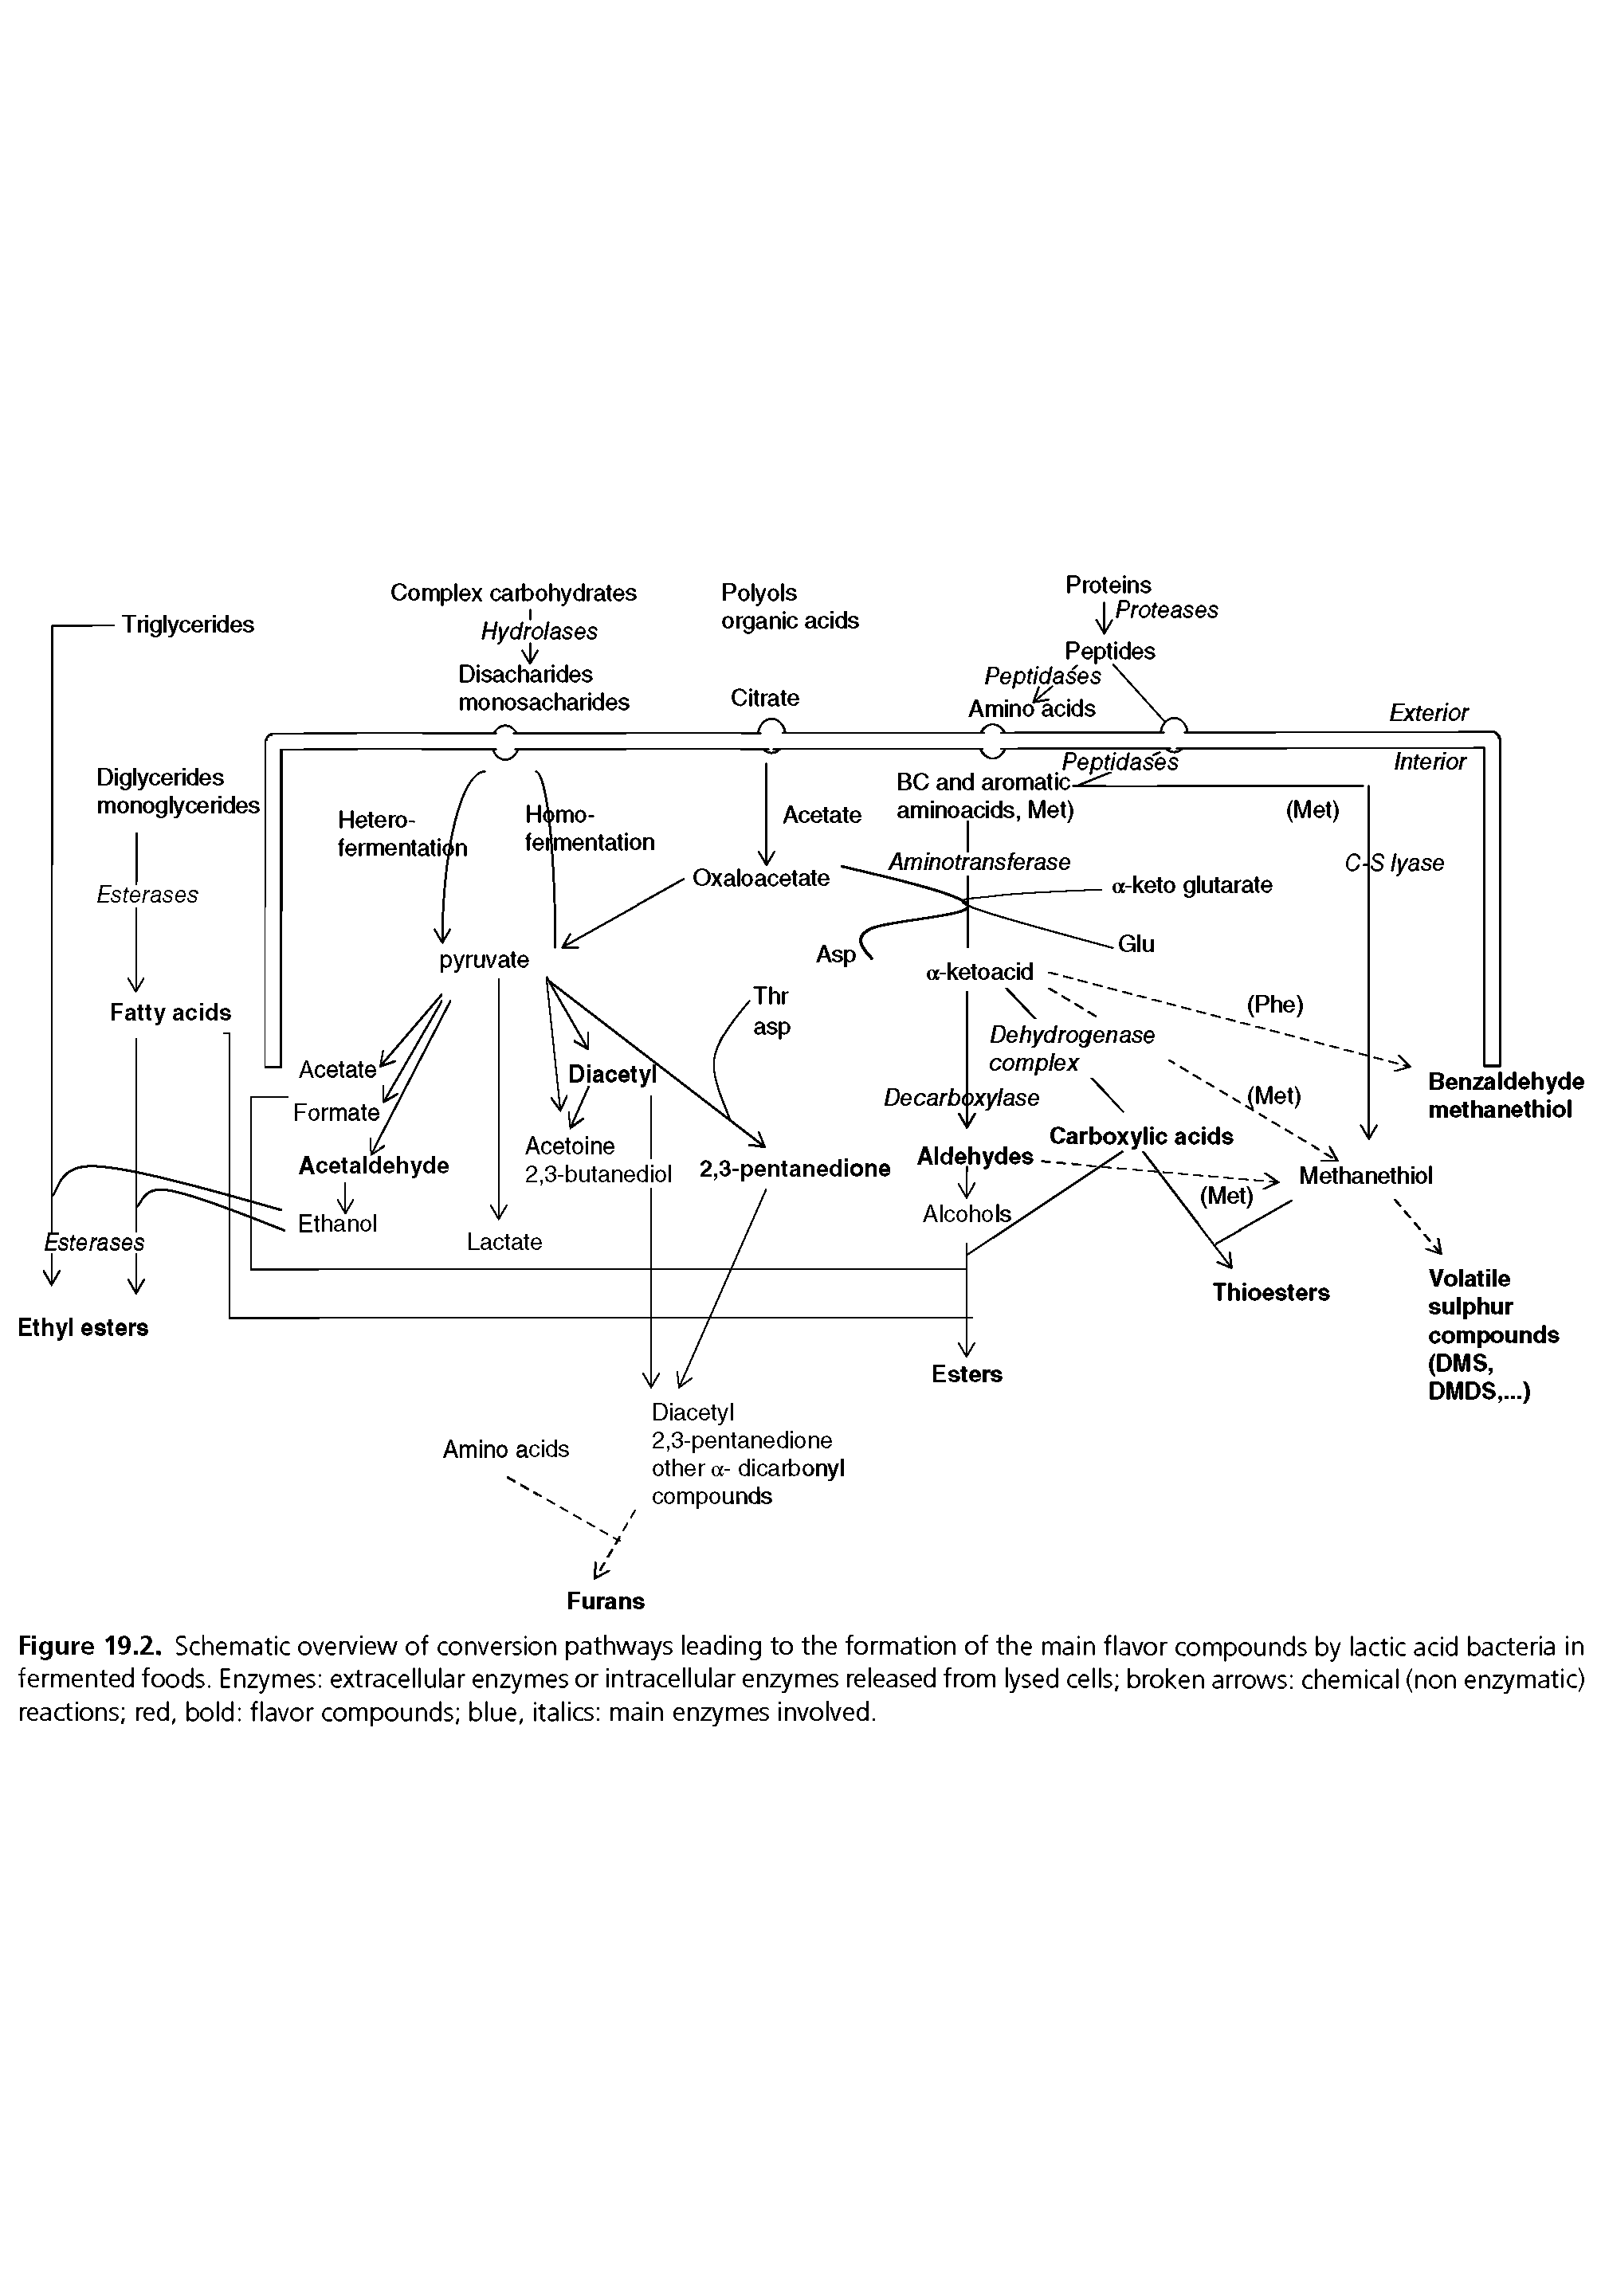 Figure 19.2. Schematic overview of conversion pathways ieading to the formation of the main fiavor compounds by iactic acid bacteria in fermented foods. Enzymes extraceiiuiar enzymes or intraceiiuiar enzymes reieased from iysed ceiis broken arrows chemicai (non enzymatic) reactions red, boid fiavor compounds biue, itaiics main enzymes invoived.